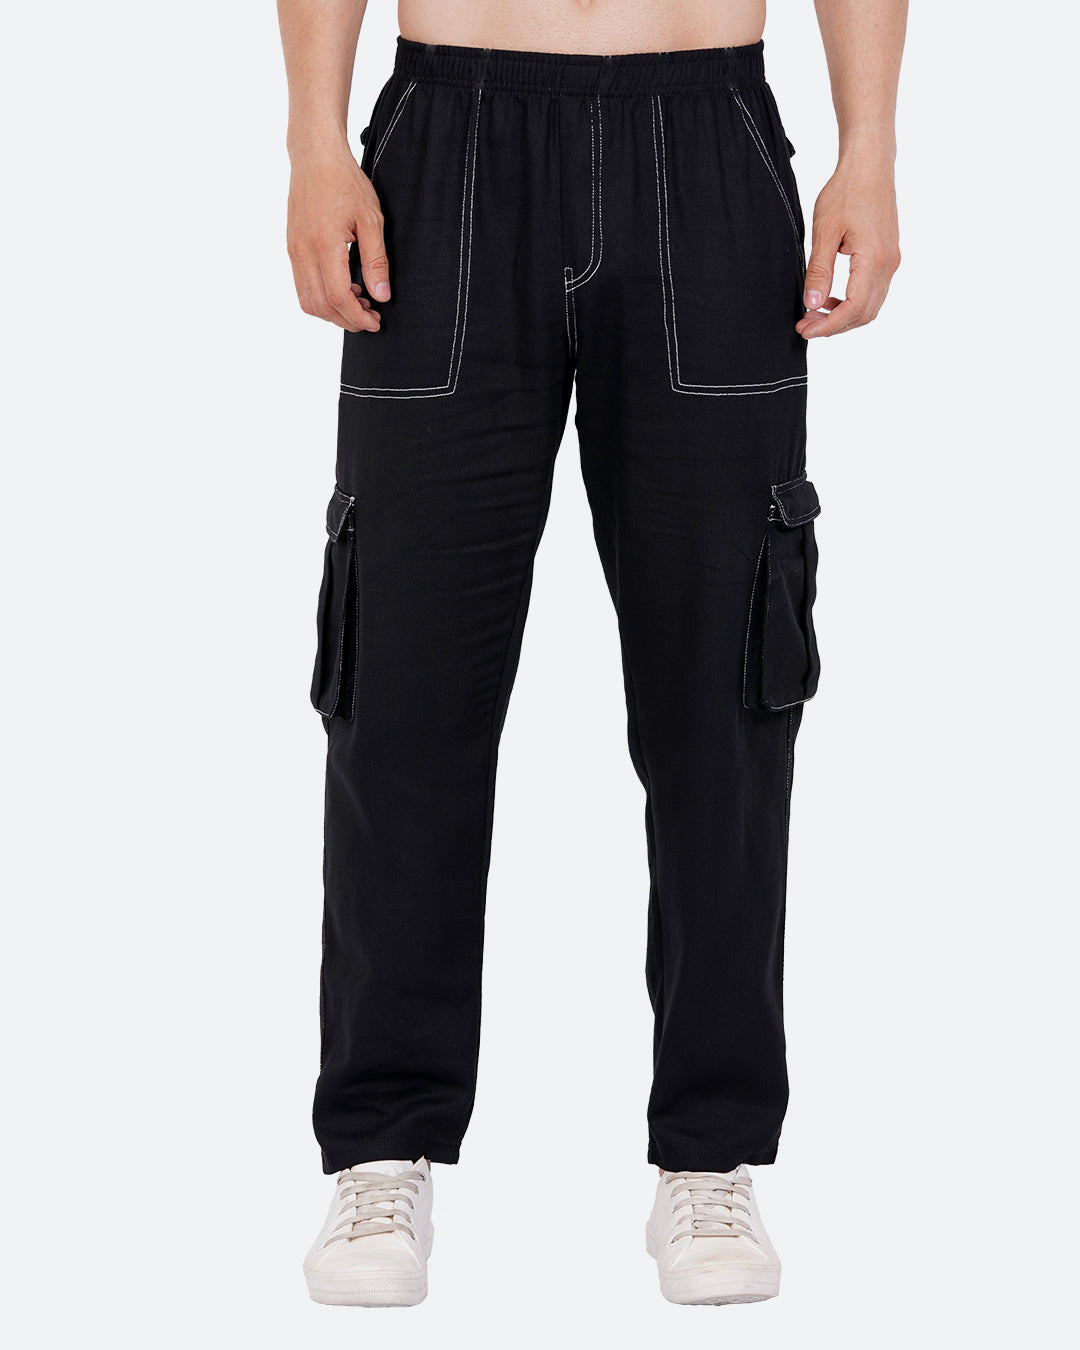 Cargo pants for men | Buy online | ABOUT YOU